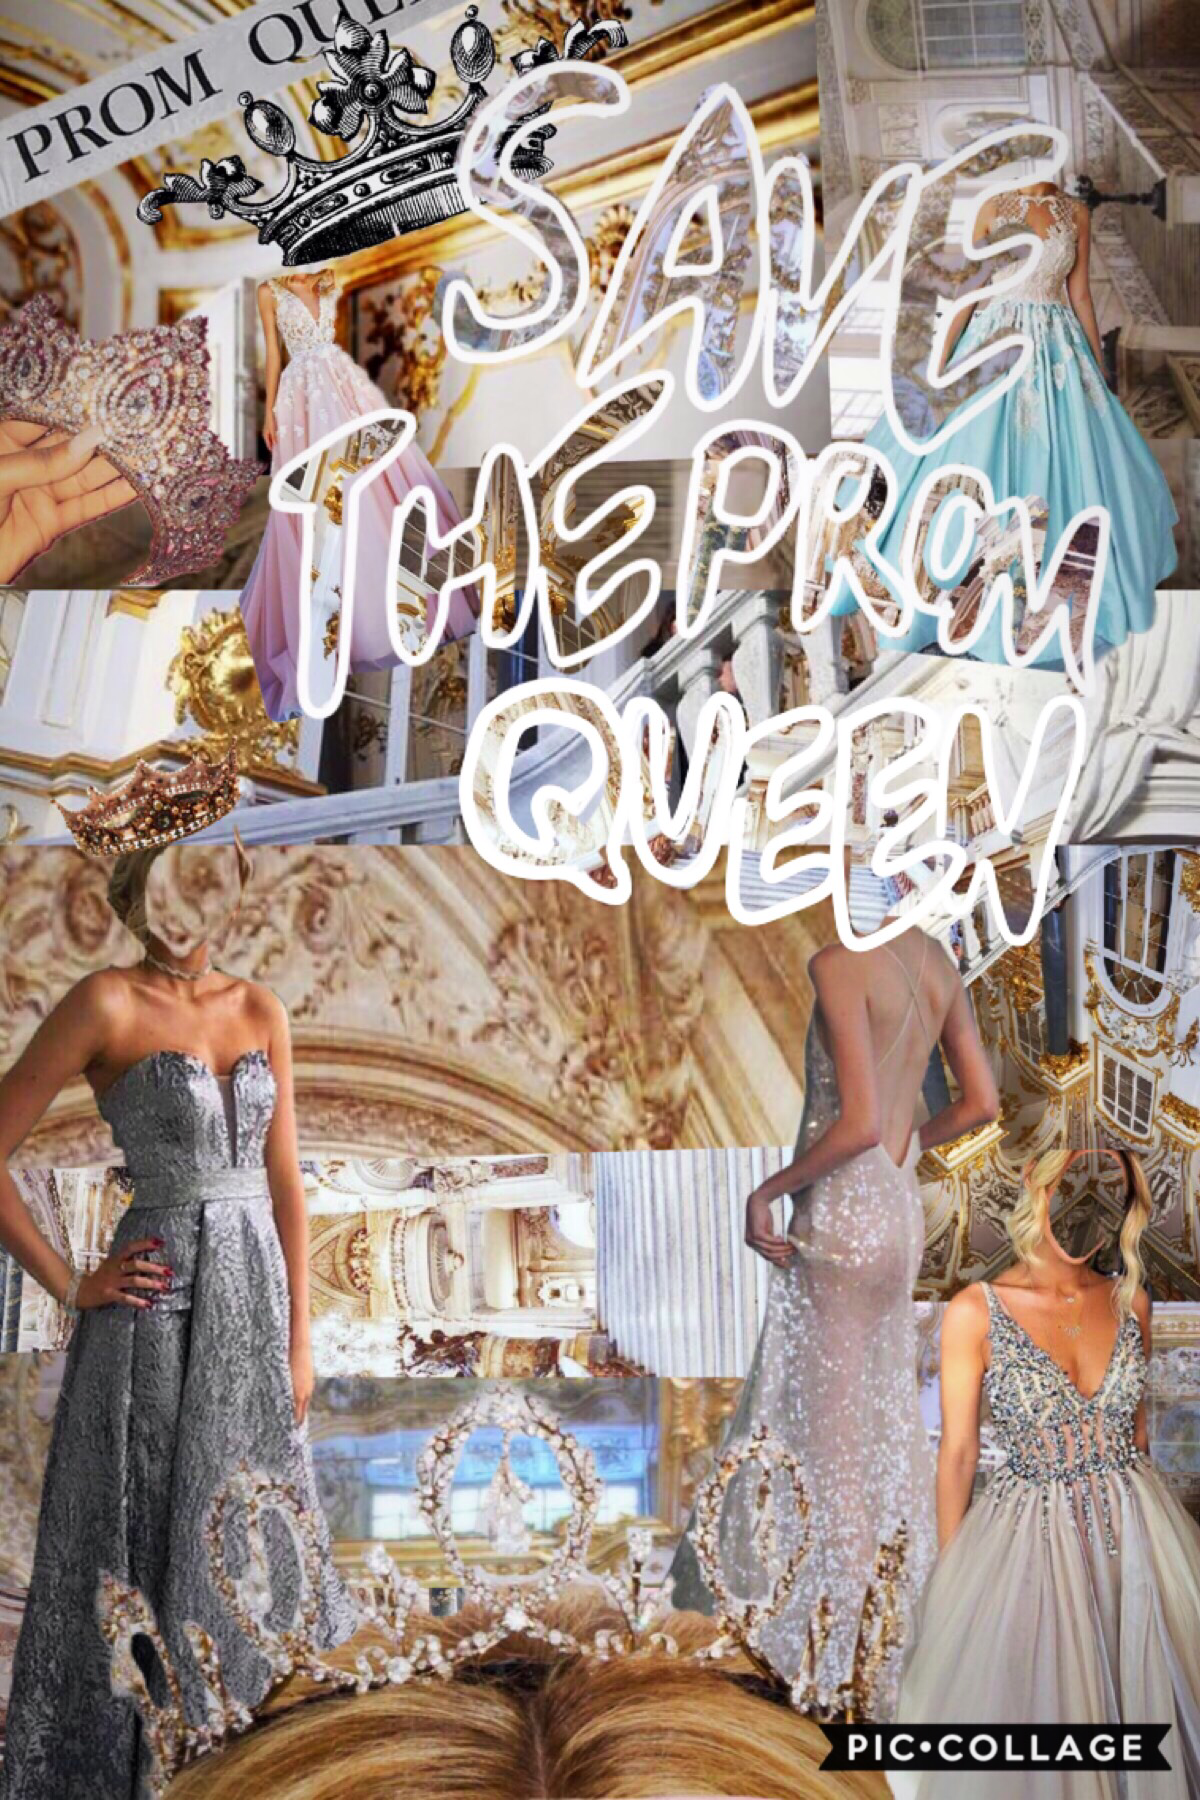 are ya gonna rap or not?

LOOKS LIKE YA TAPPED INSTEAD😂 (oh Lauren)
made this on a whim, based off Prom Queen by Molly Kate Keshner (aka my queen 👑)
YAY I FINALLY POSTED! 
Inspired by the lovely and talented @Fangirlism_ 💗





